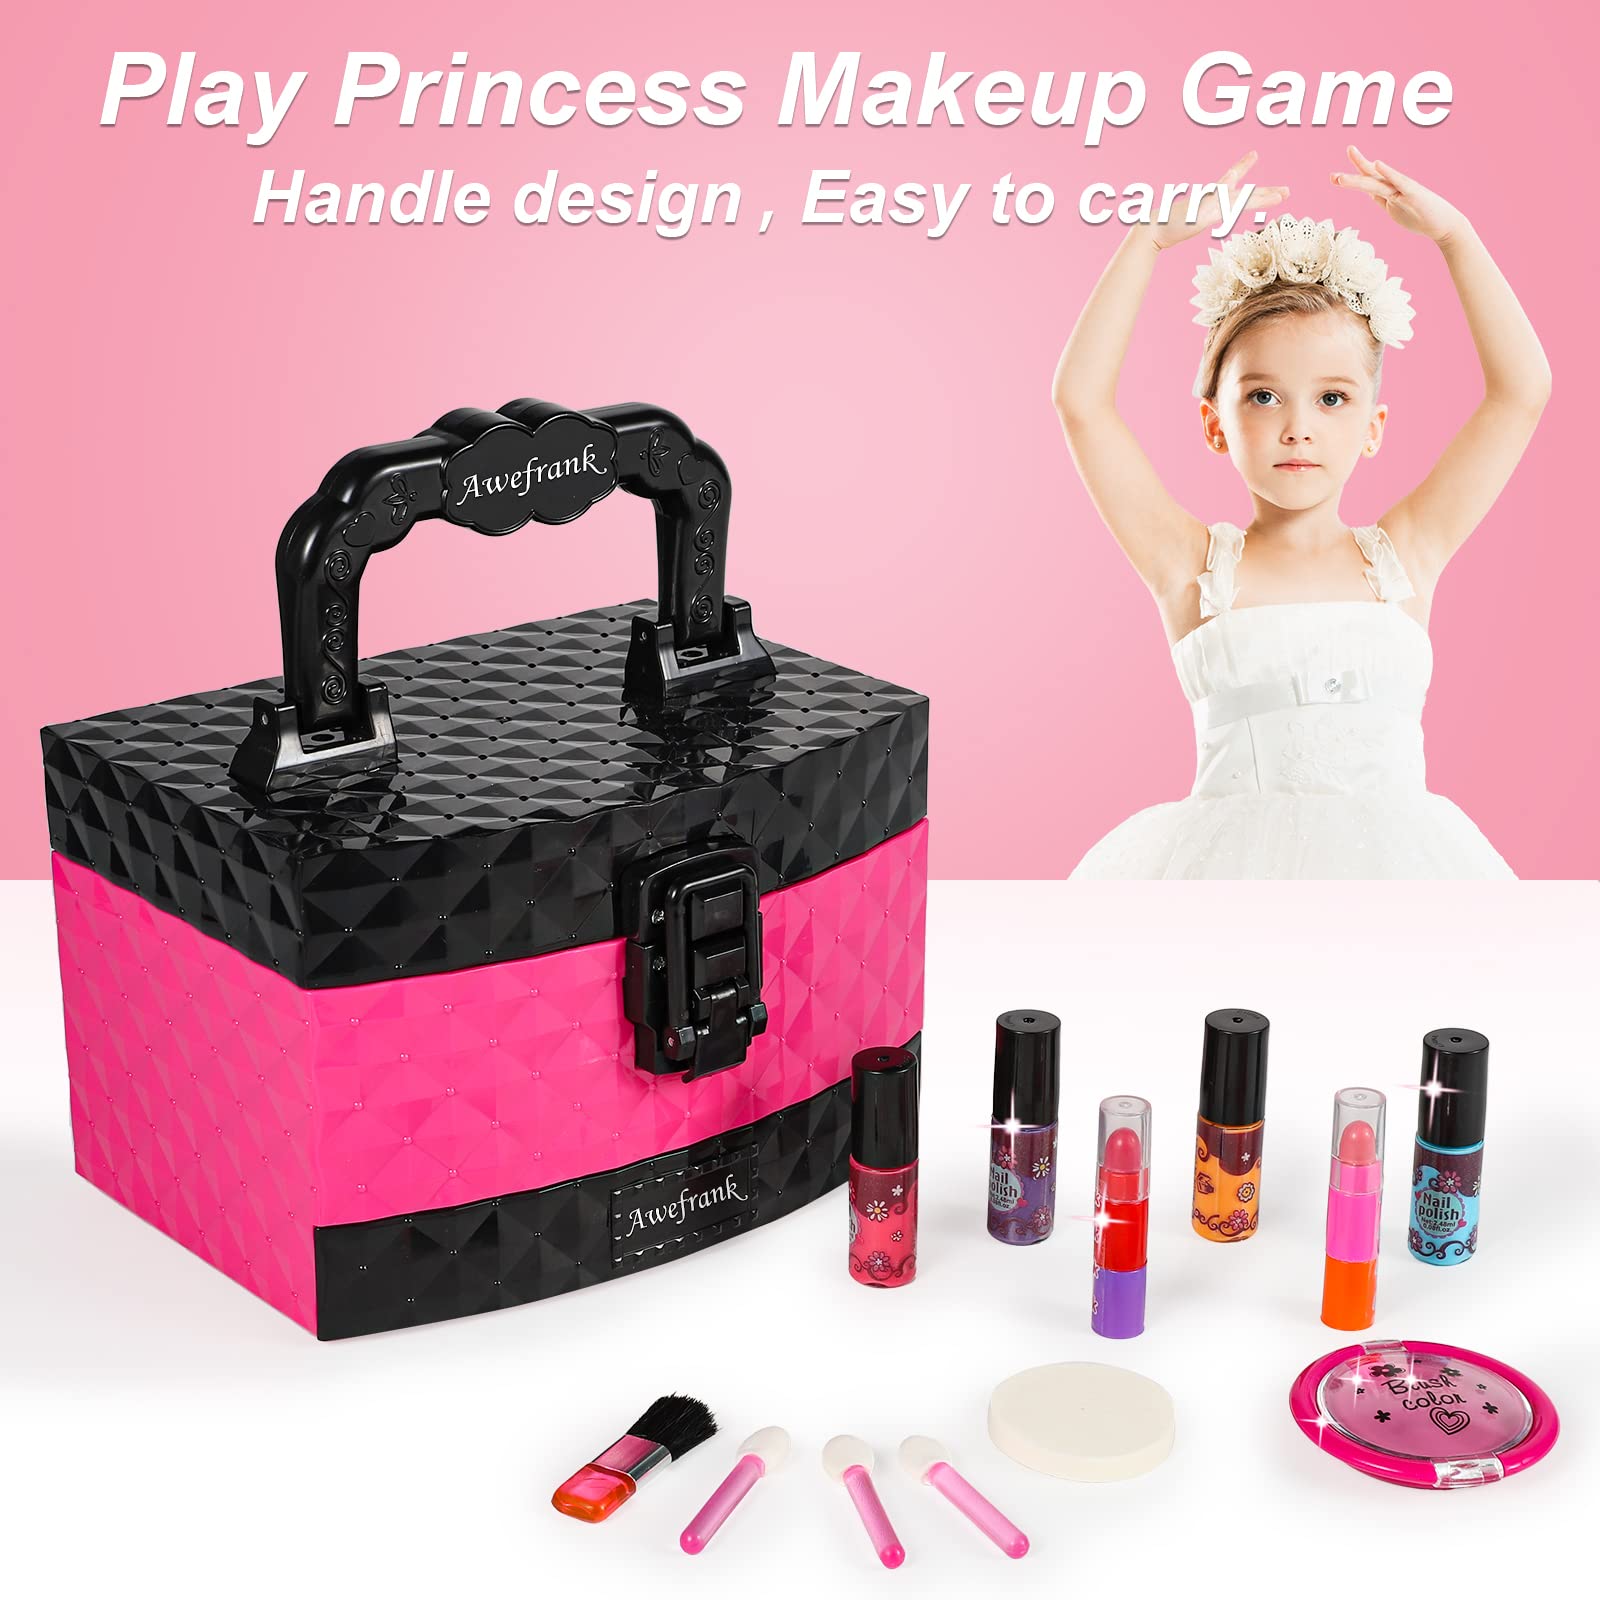 AWEFRANK Kids Makeup Kit for Girls Toys, Toddler Makeup Set, Real Safe & Non-Toxic & Washable for Endless Fun and Creativity, Perfect Princess Gift & Valentines Day Gifts for Ages 3-12